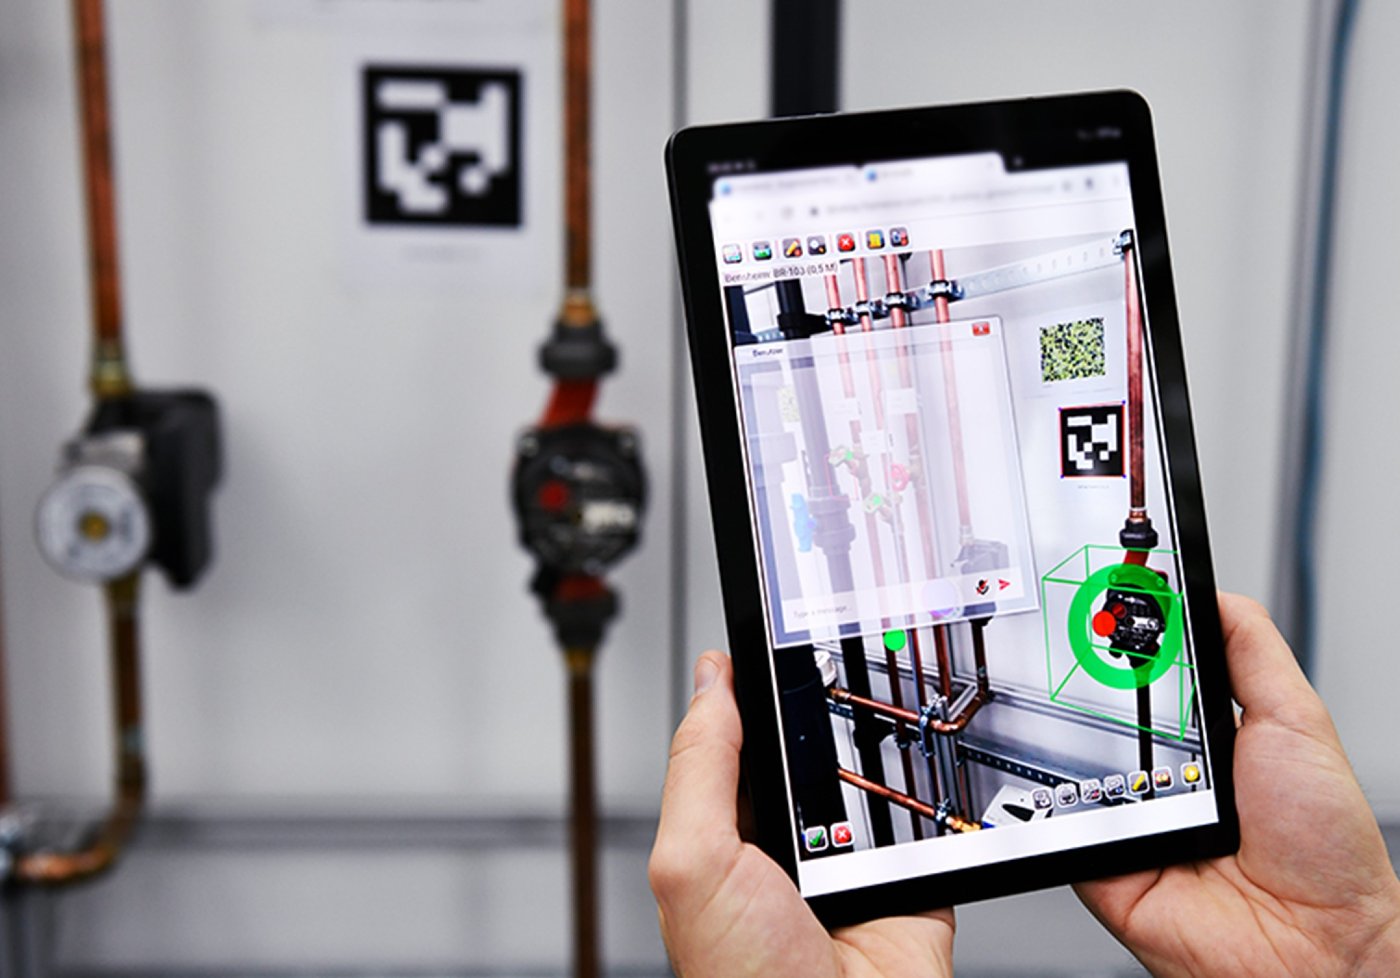 AR Training for Construction workers